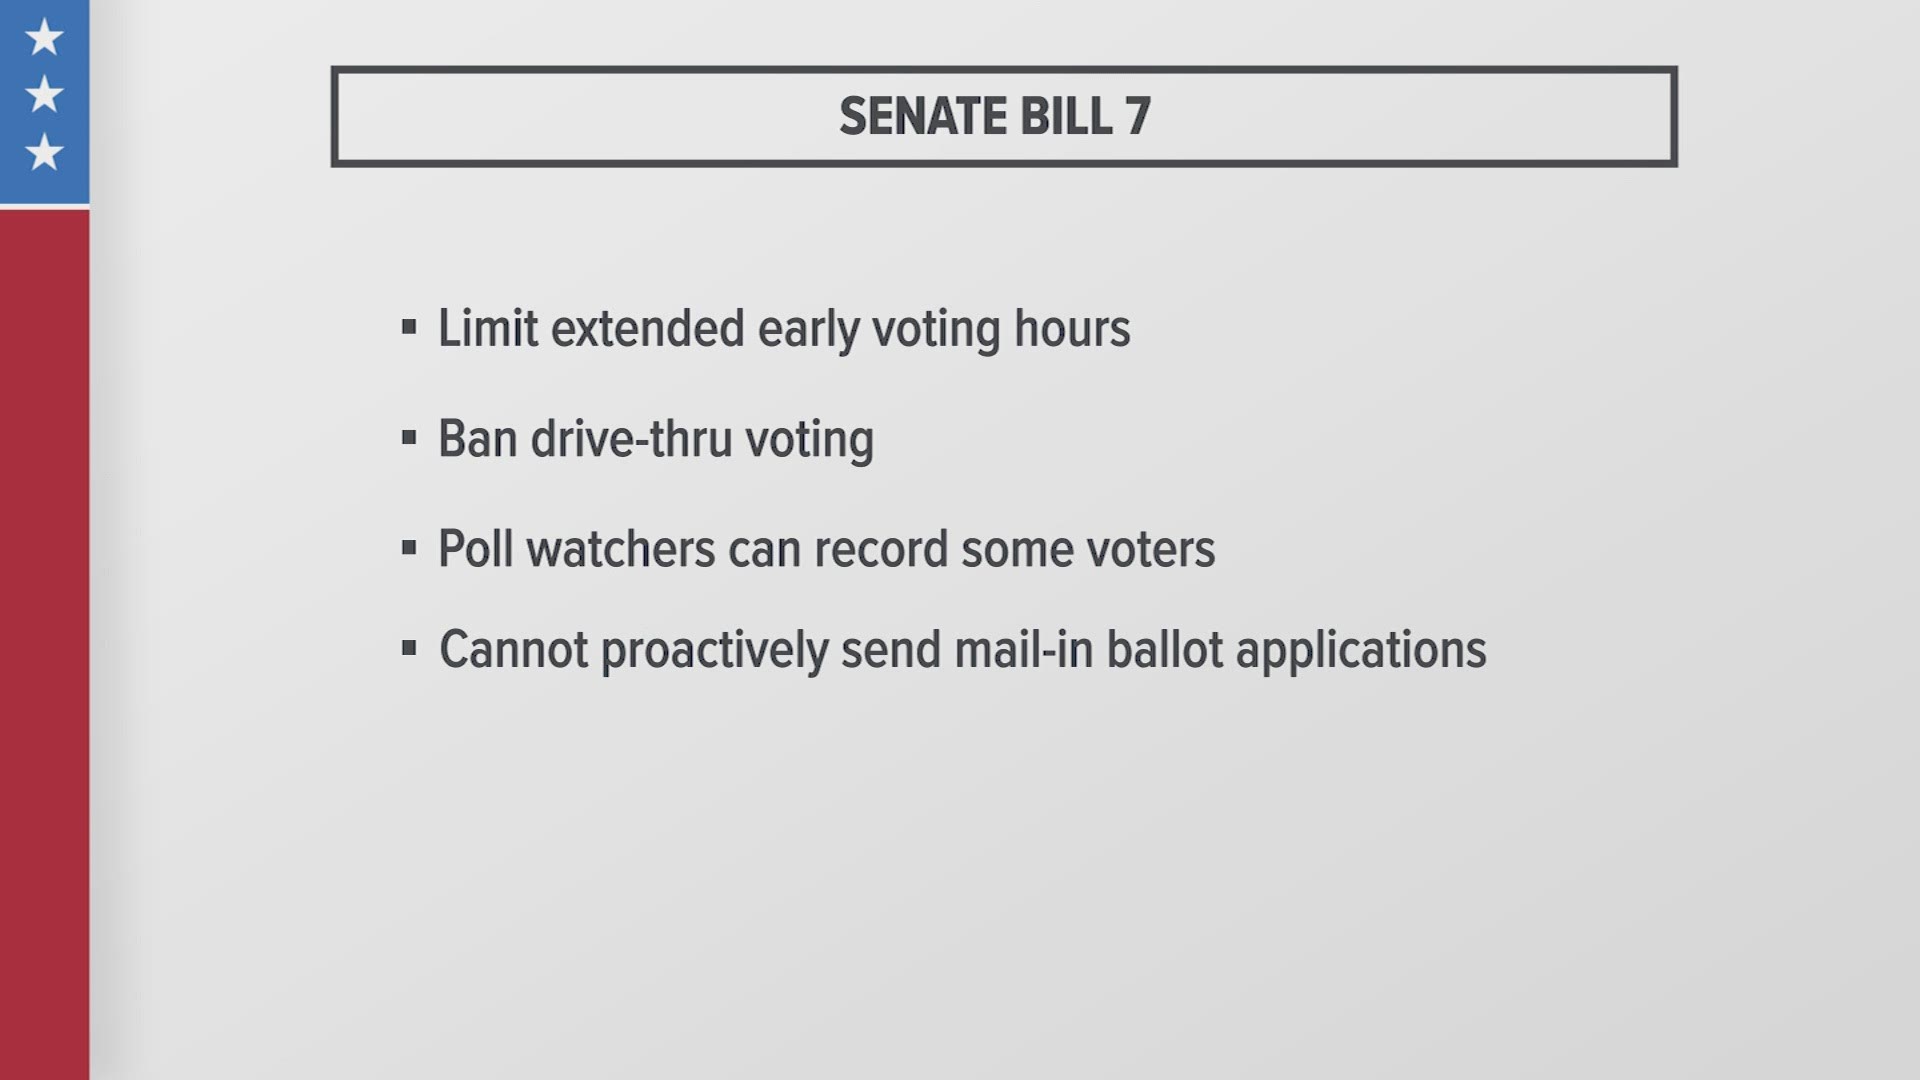 Senate Bill 7 would limit early voting hours, ban drive-thru voting, allow poll watchers to record some voters and not allow mail-in ballots to be sent proactively.